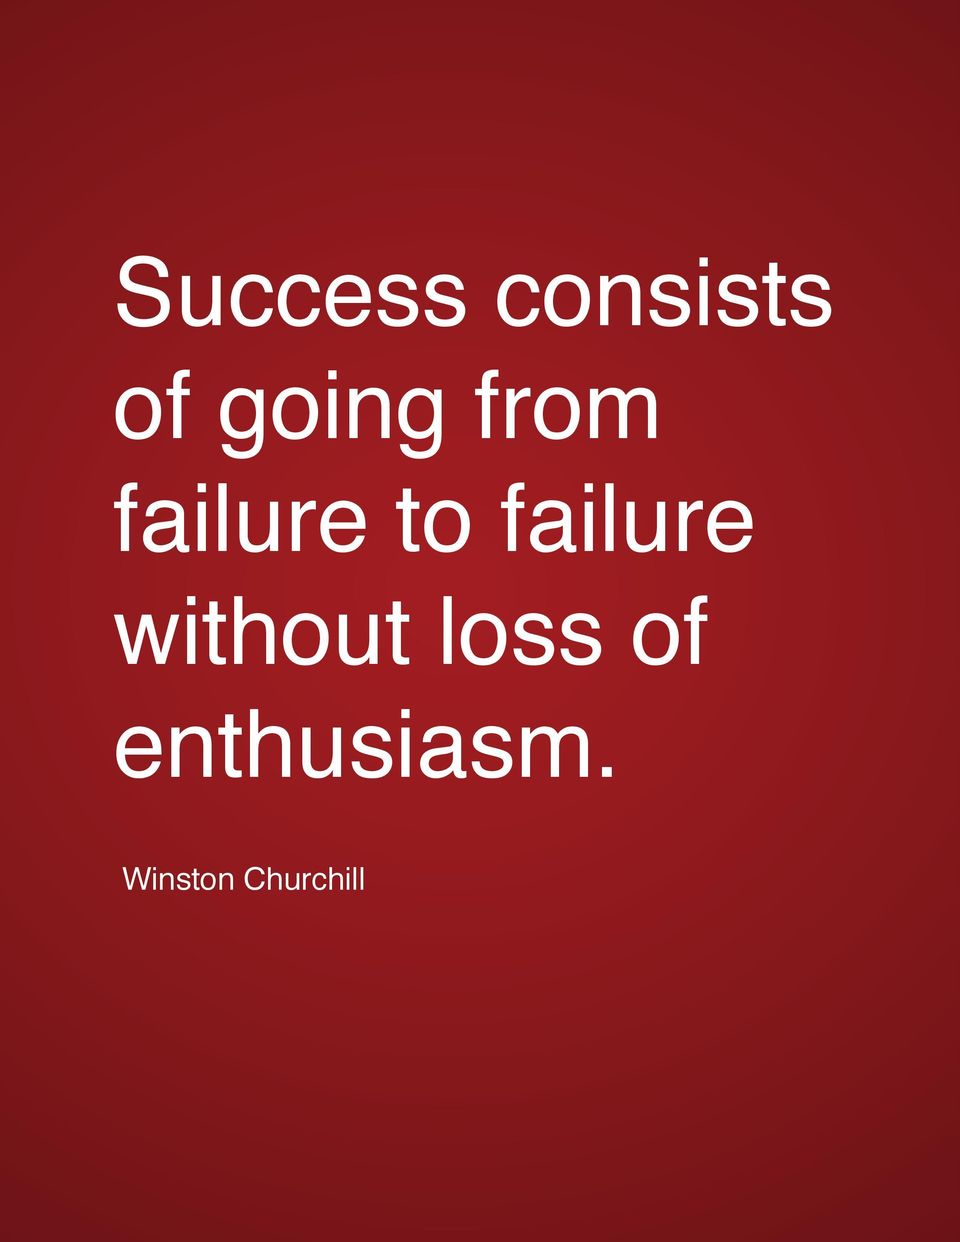 failure without loss of